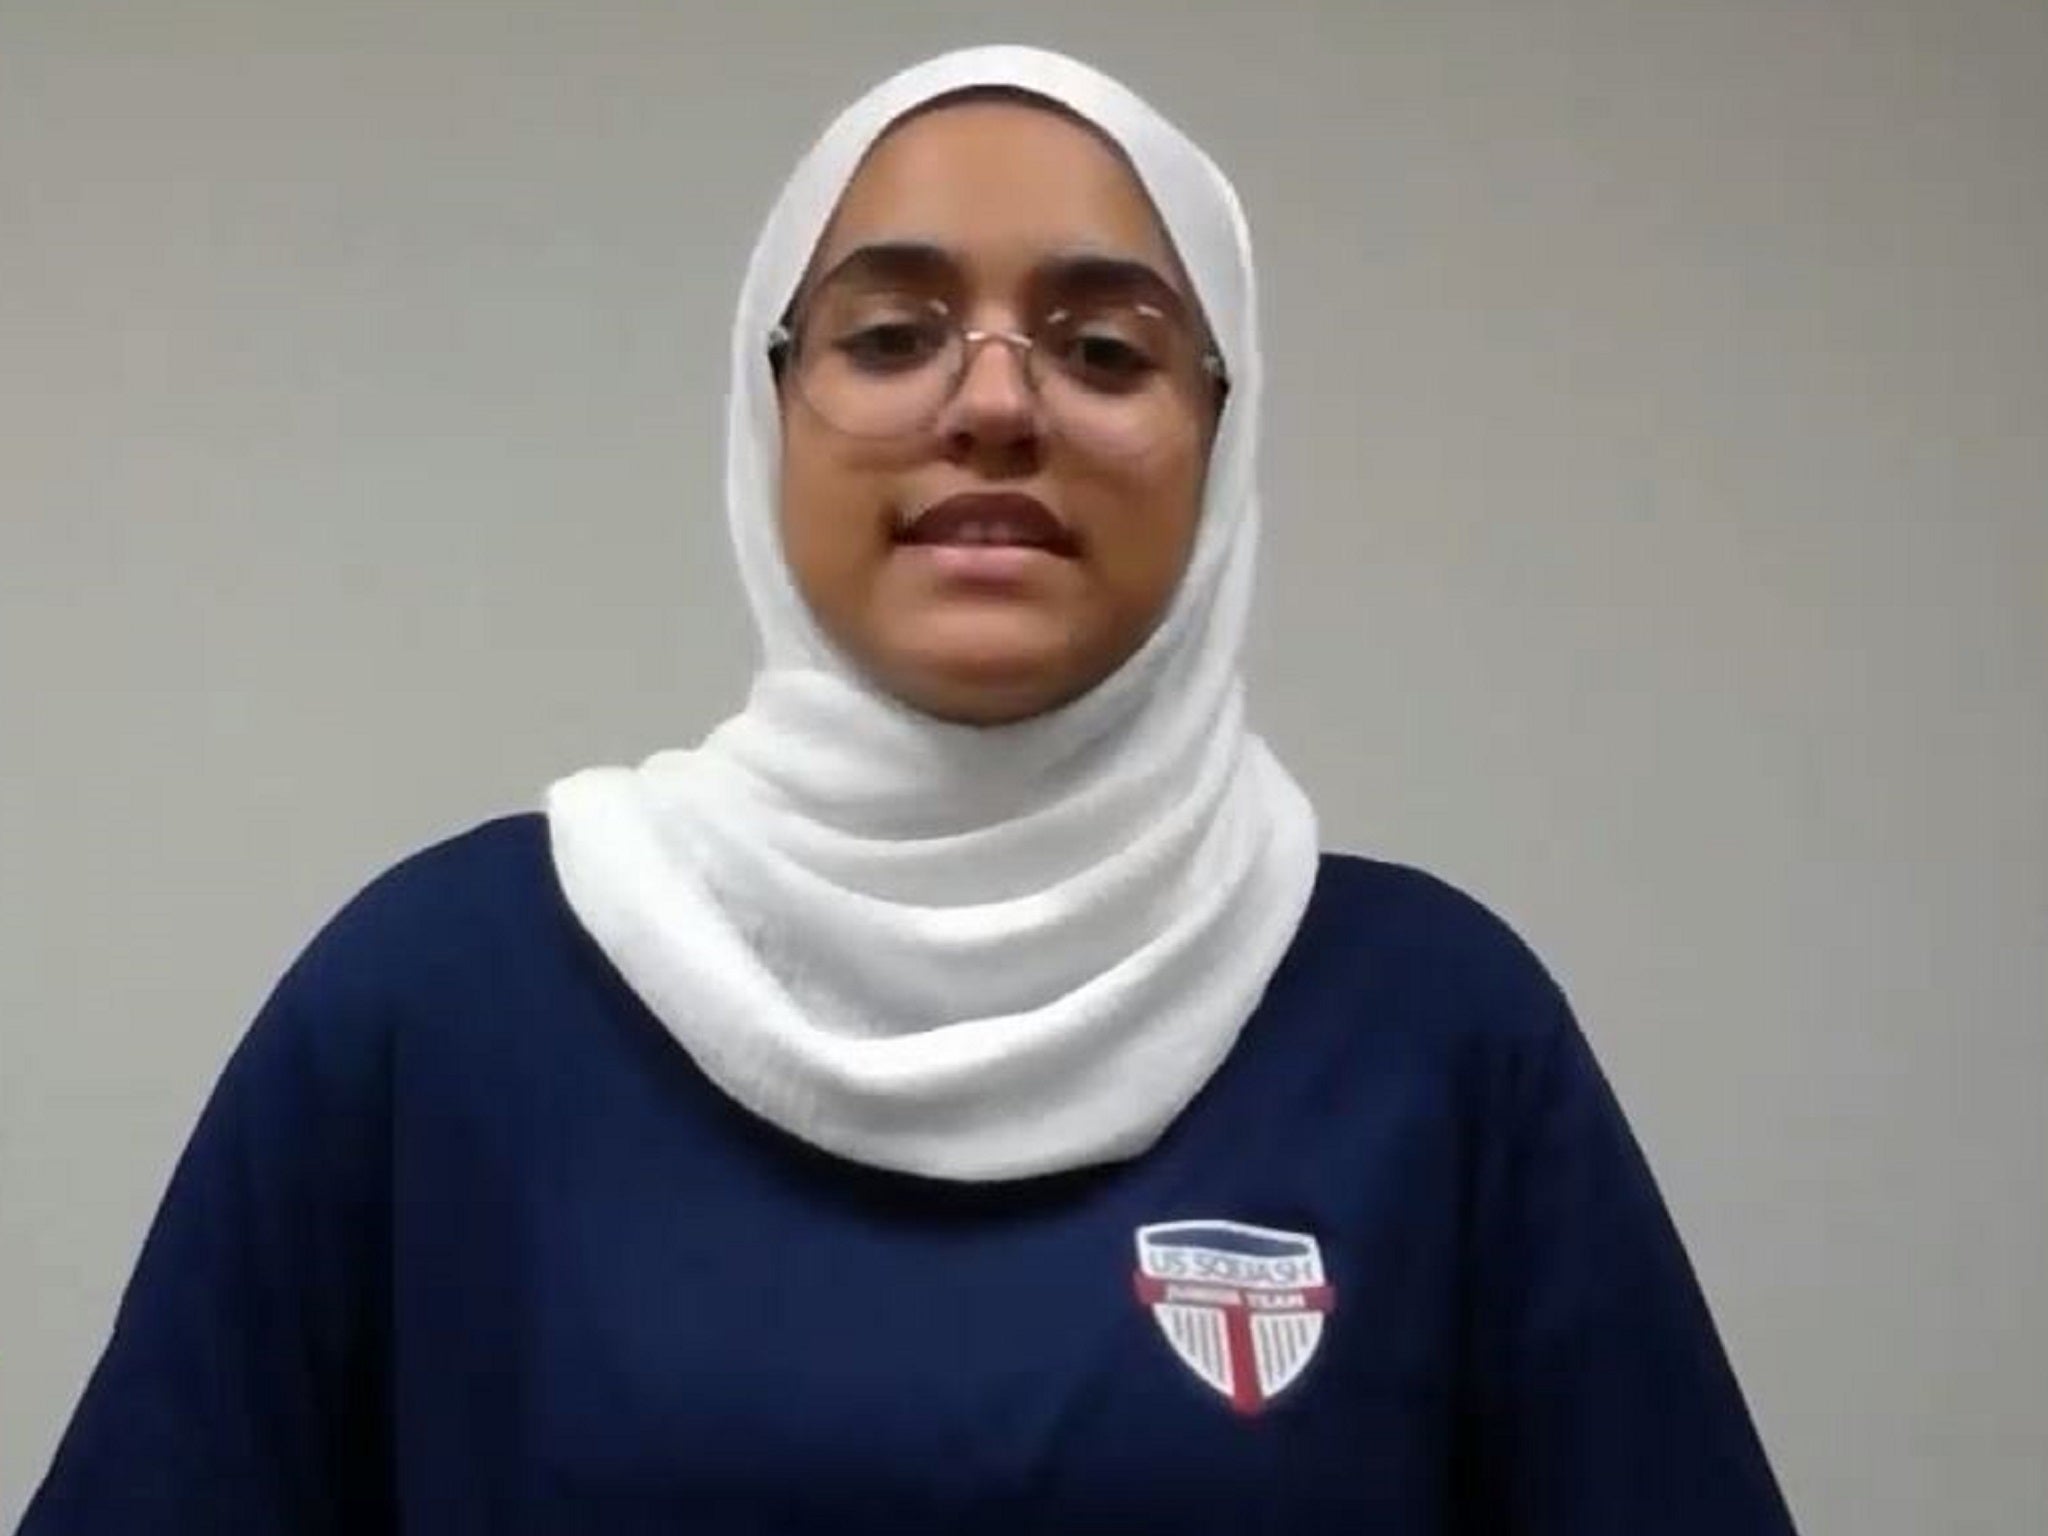 Still image from KPIX-TV video of Fatima Abdelrahman, 13, who was forced to remove her hijab in public before boarding a flight from San Francisco to Toronto, 1 August 2019.